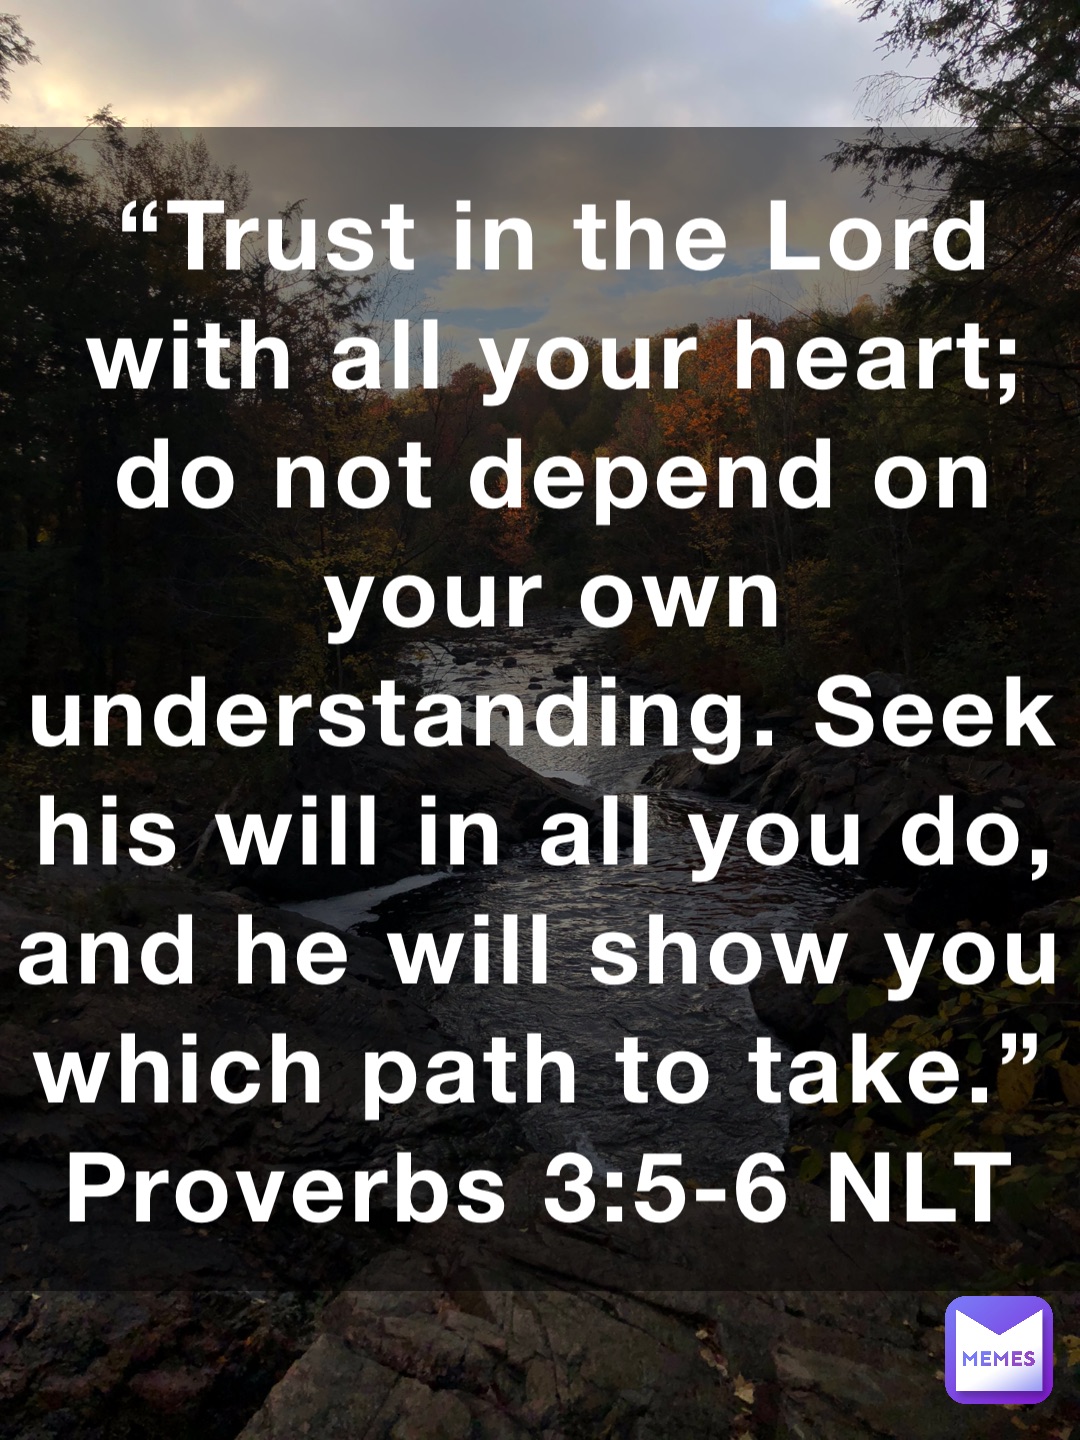 “Trust in the Lord with all your heart; do not depend on your own understanding. Seek his will in all you do, and he will show you which path to take.”
‭‭Proverbs‬ ‭3:5-6‬ ‭NLT‬‬